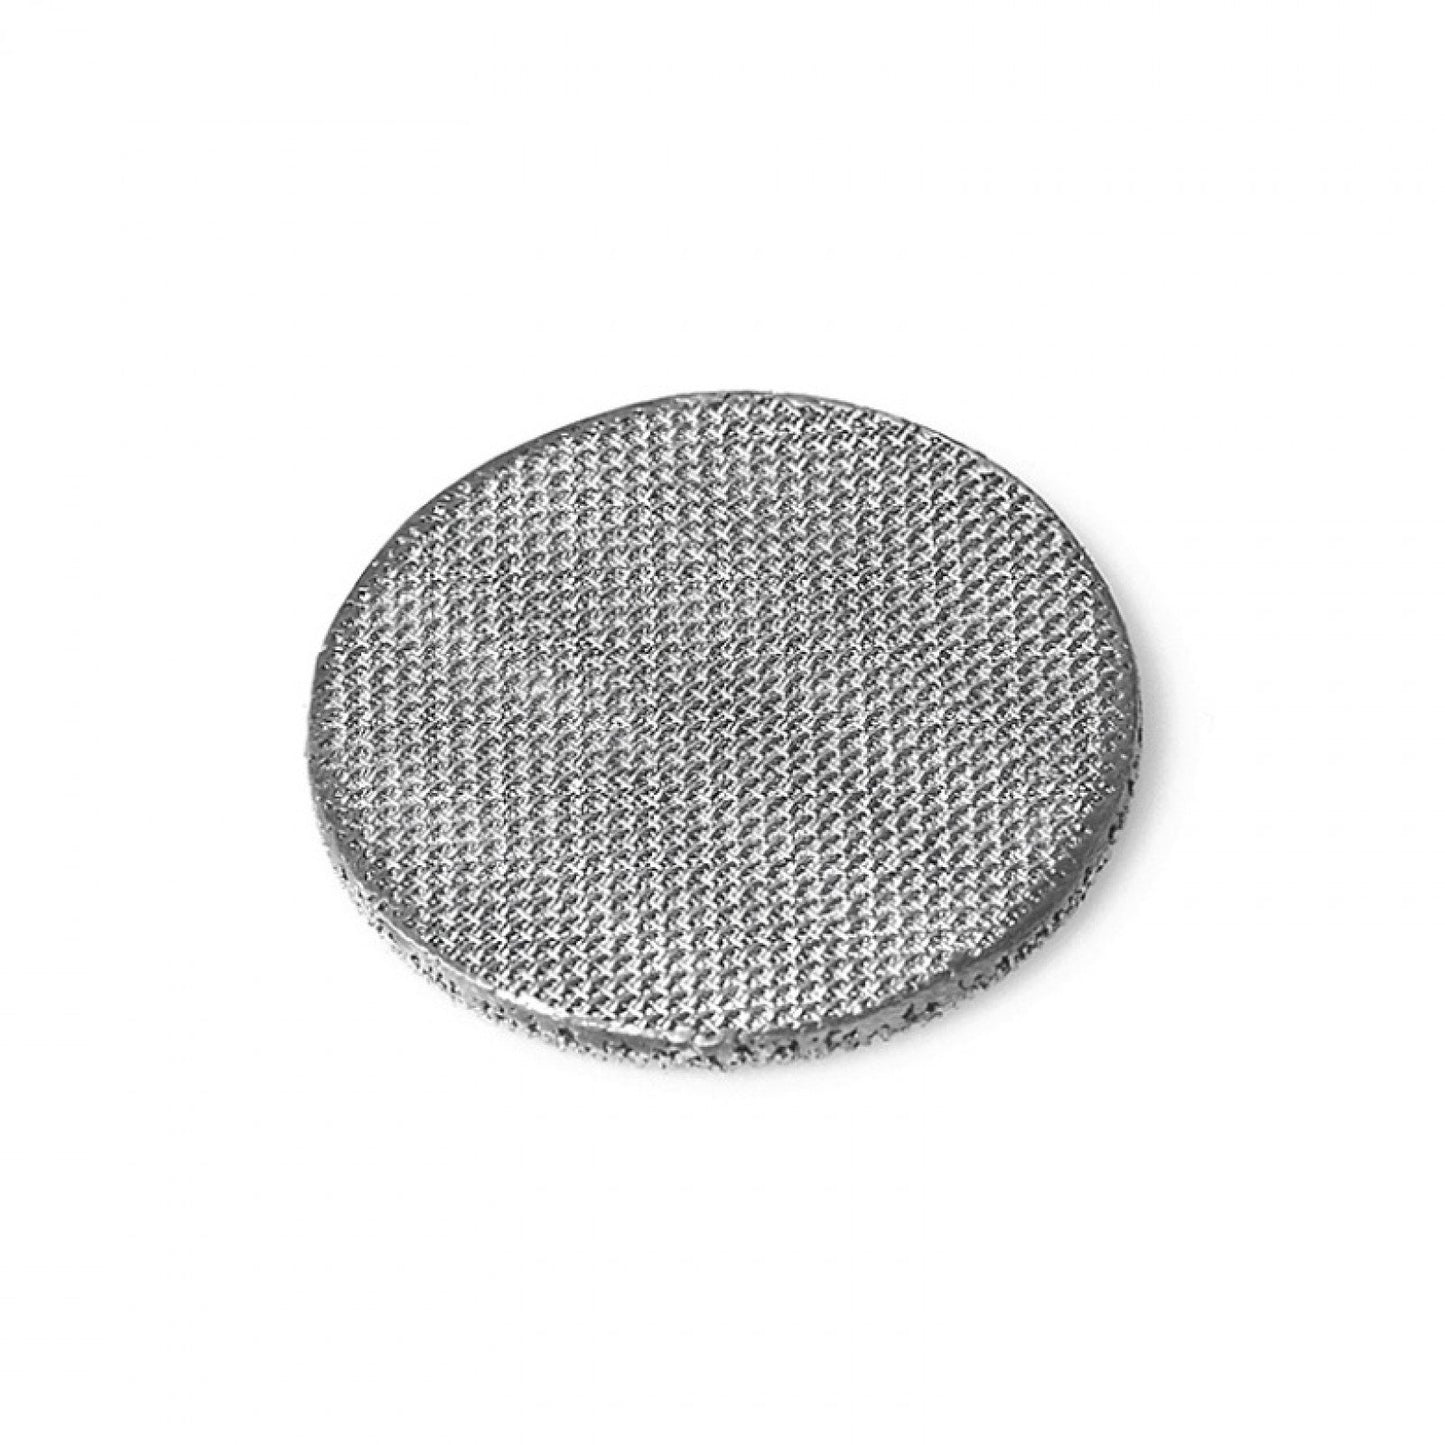 Nuke Performance 100 Micron Replacement Filter Disc for Top Lid Outlet-NUK-26510203-Nuke Performance-JDMuscle